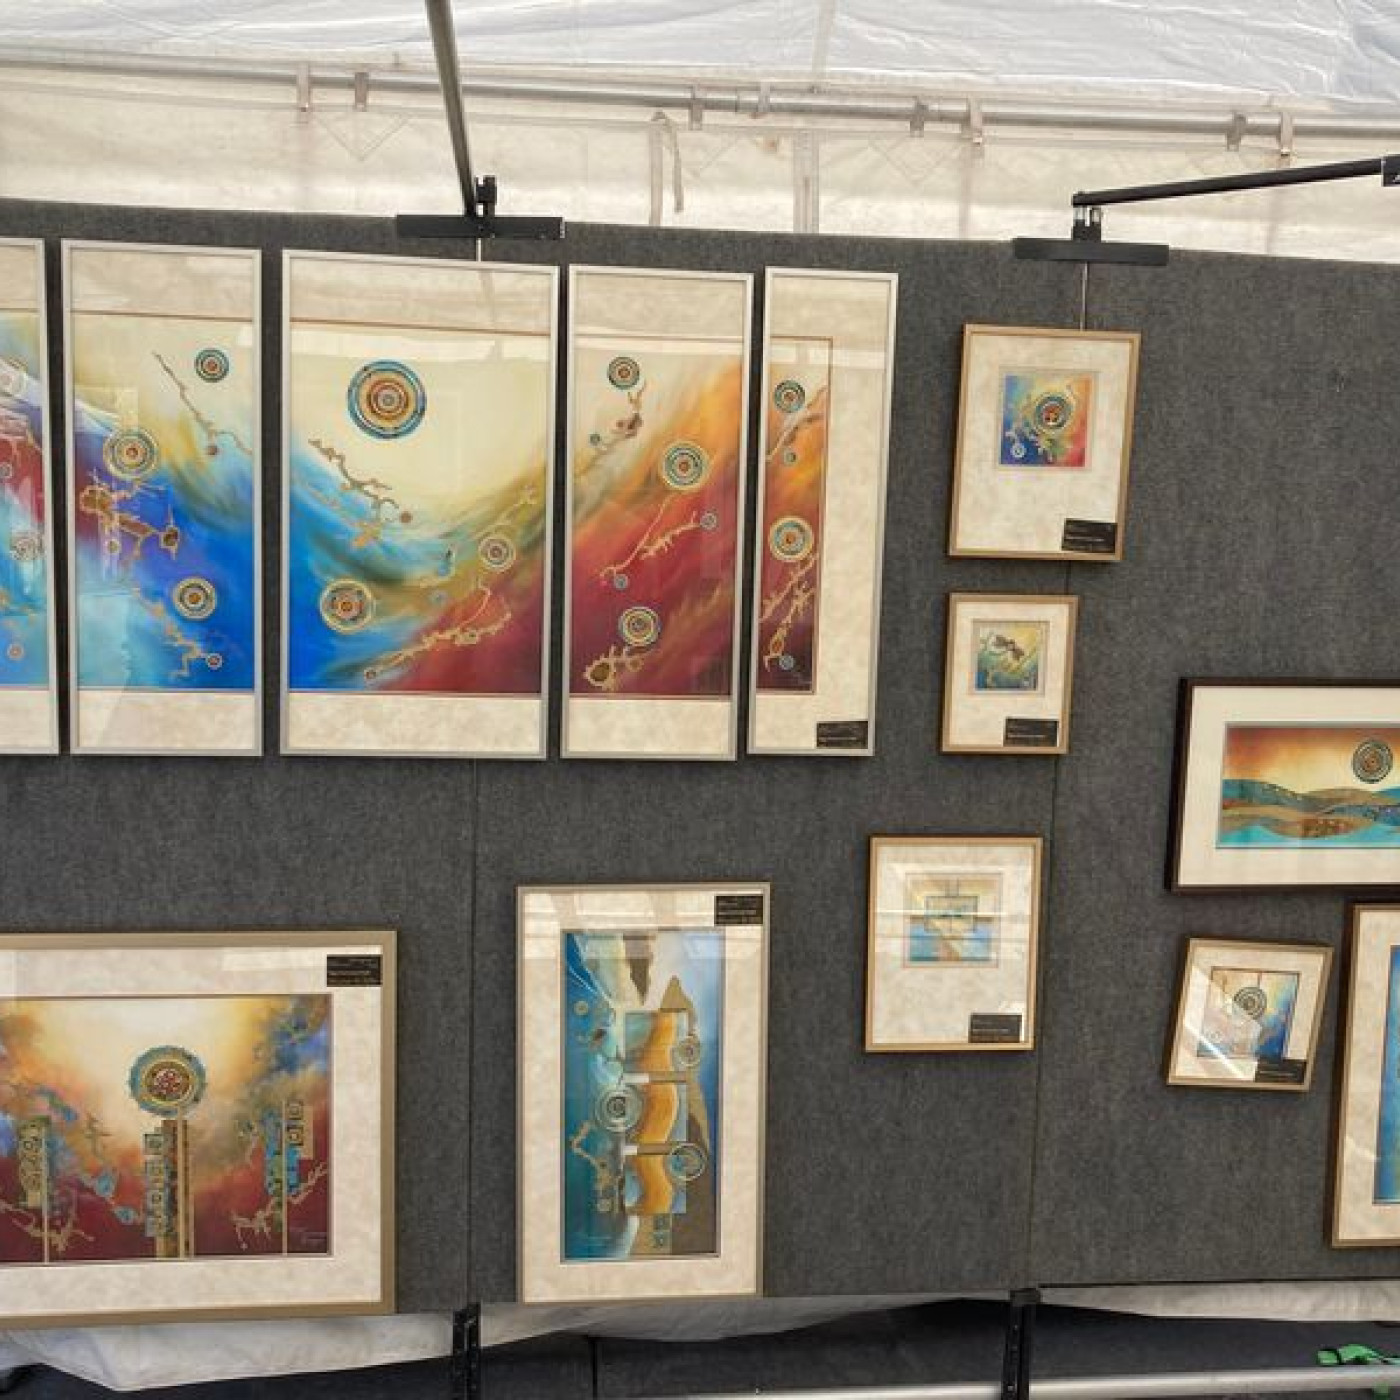 10 Art Show Display Ideas to Show Paintings & Prints in a Craft Booth